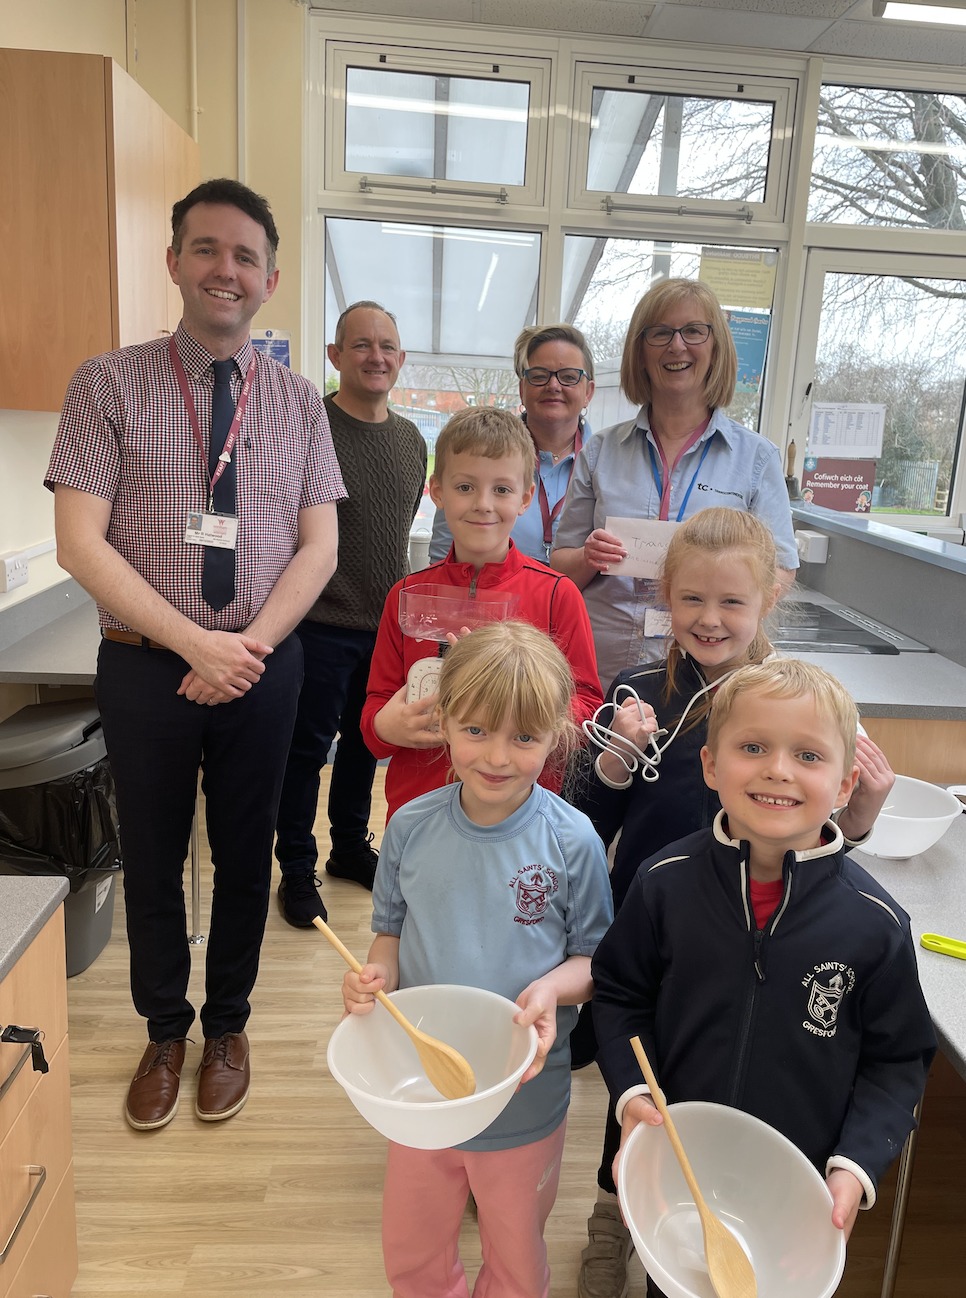 Headteacher Richard Hatwood with Martin Dobie, Lynn Roberts, Karen Jarvis from TC Transcontinental, and pupils from Year 1/2 at All Saints School, Gresford.